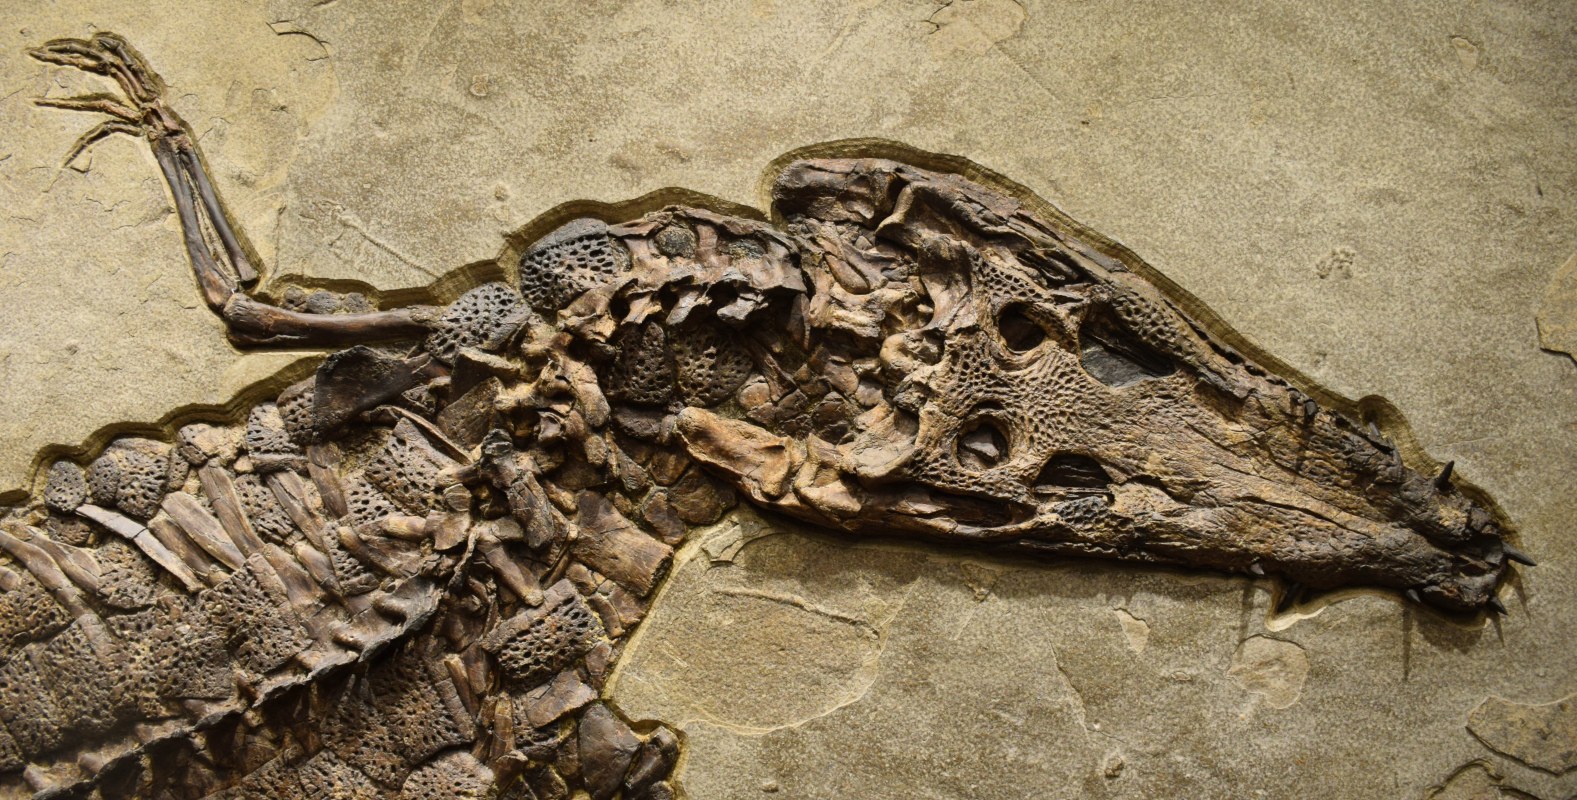 Skull of a rare fossil Crocodile from the Early Eocene